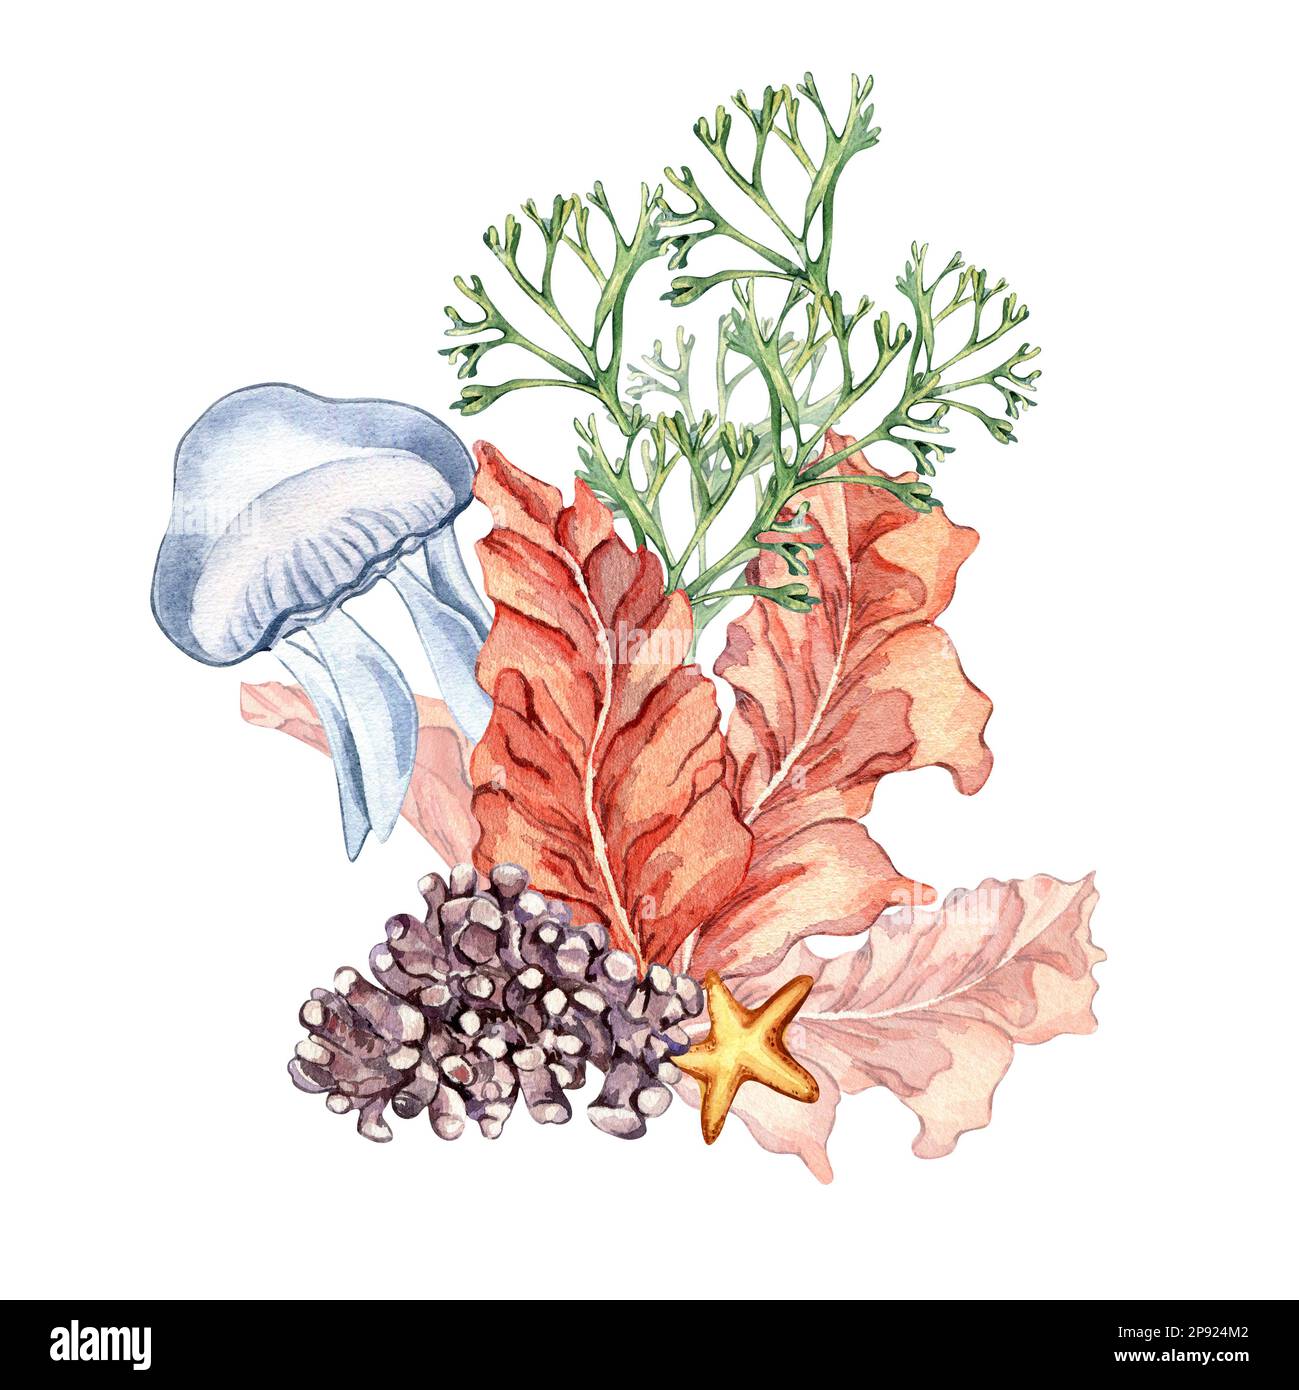 Composition of colorful sea plants watercolor illustration isolated on white. Red porphyra, , purple coral, codium, jellyfish hand drawn. Design eleme Stock Photo